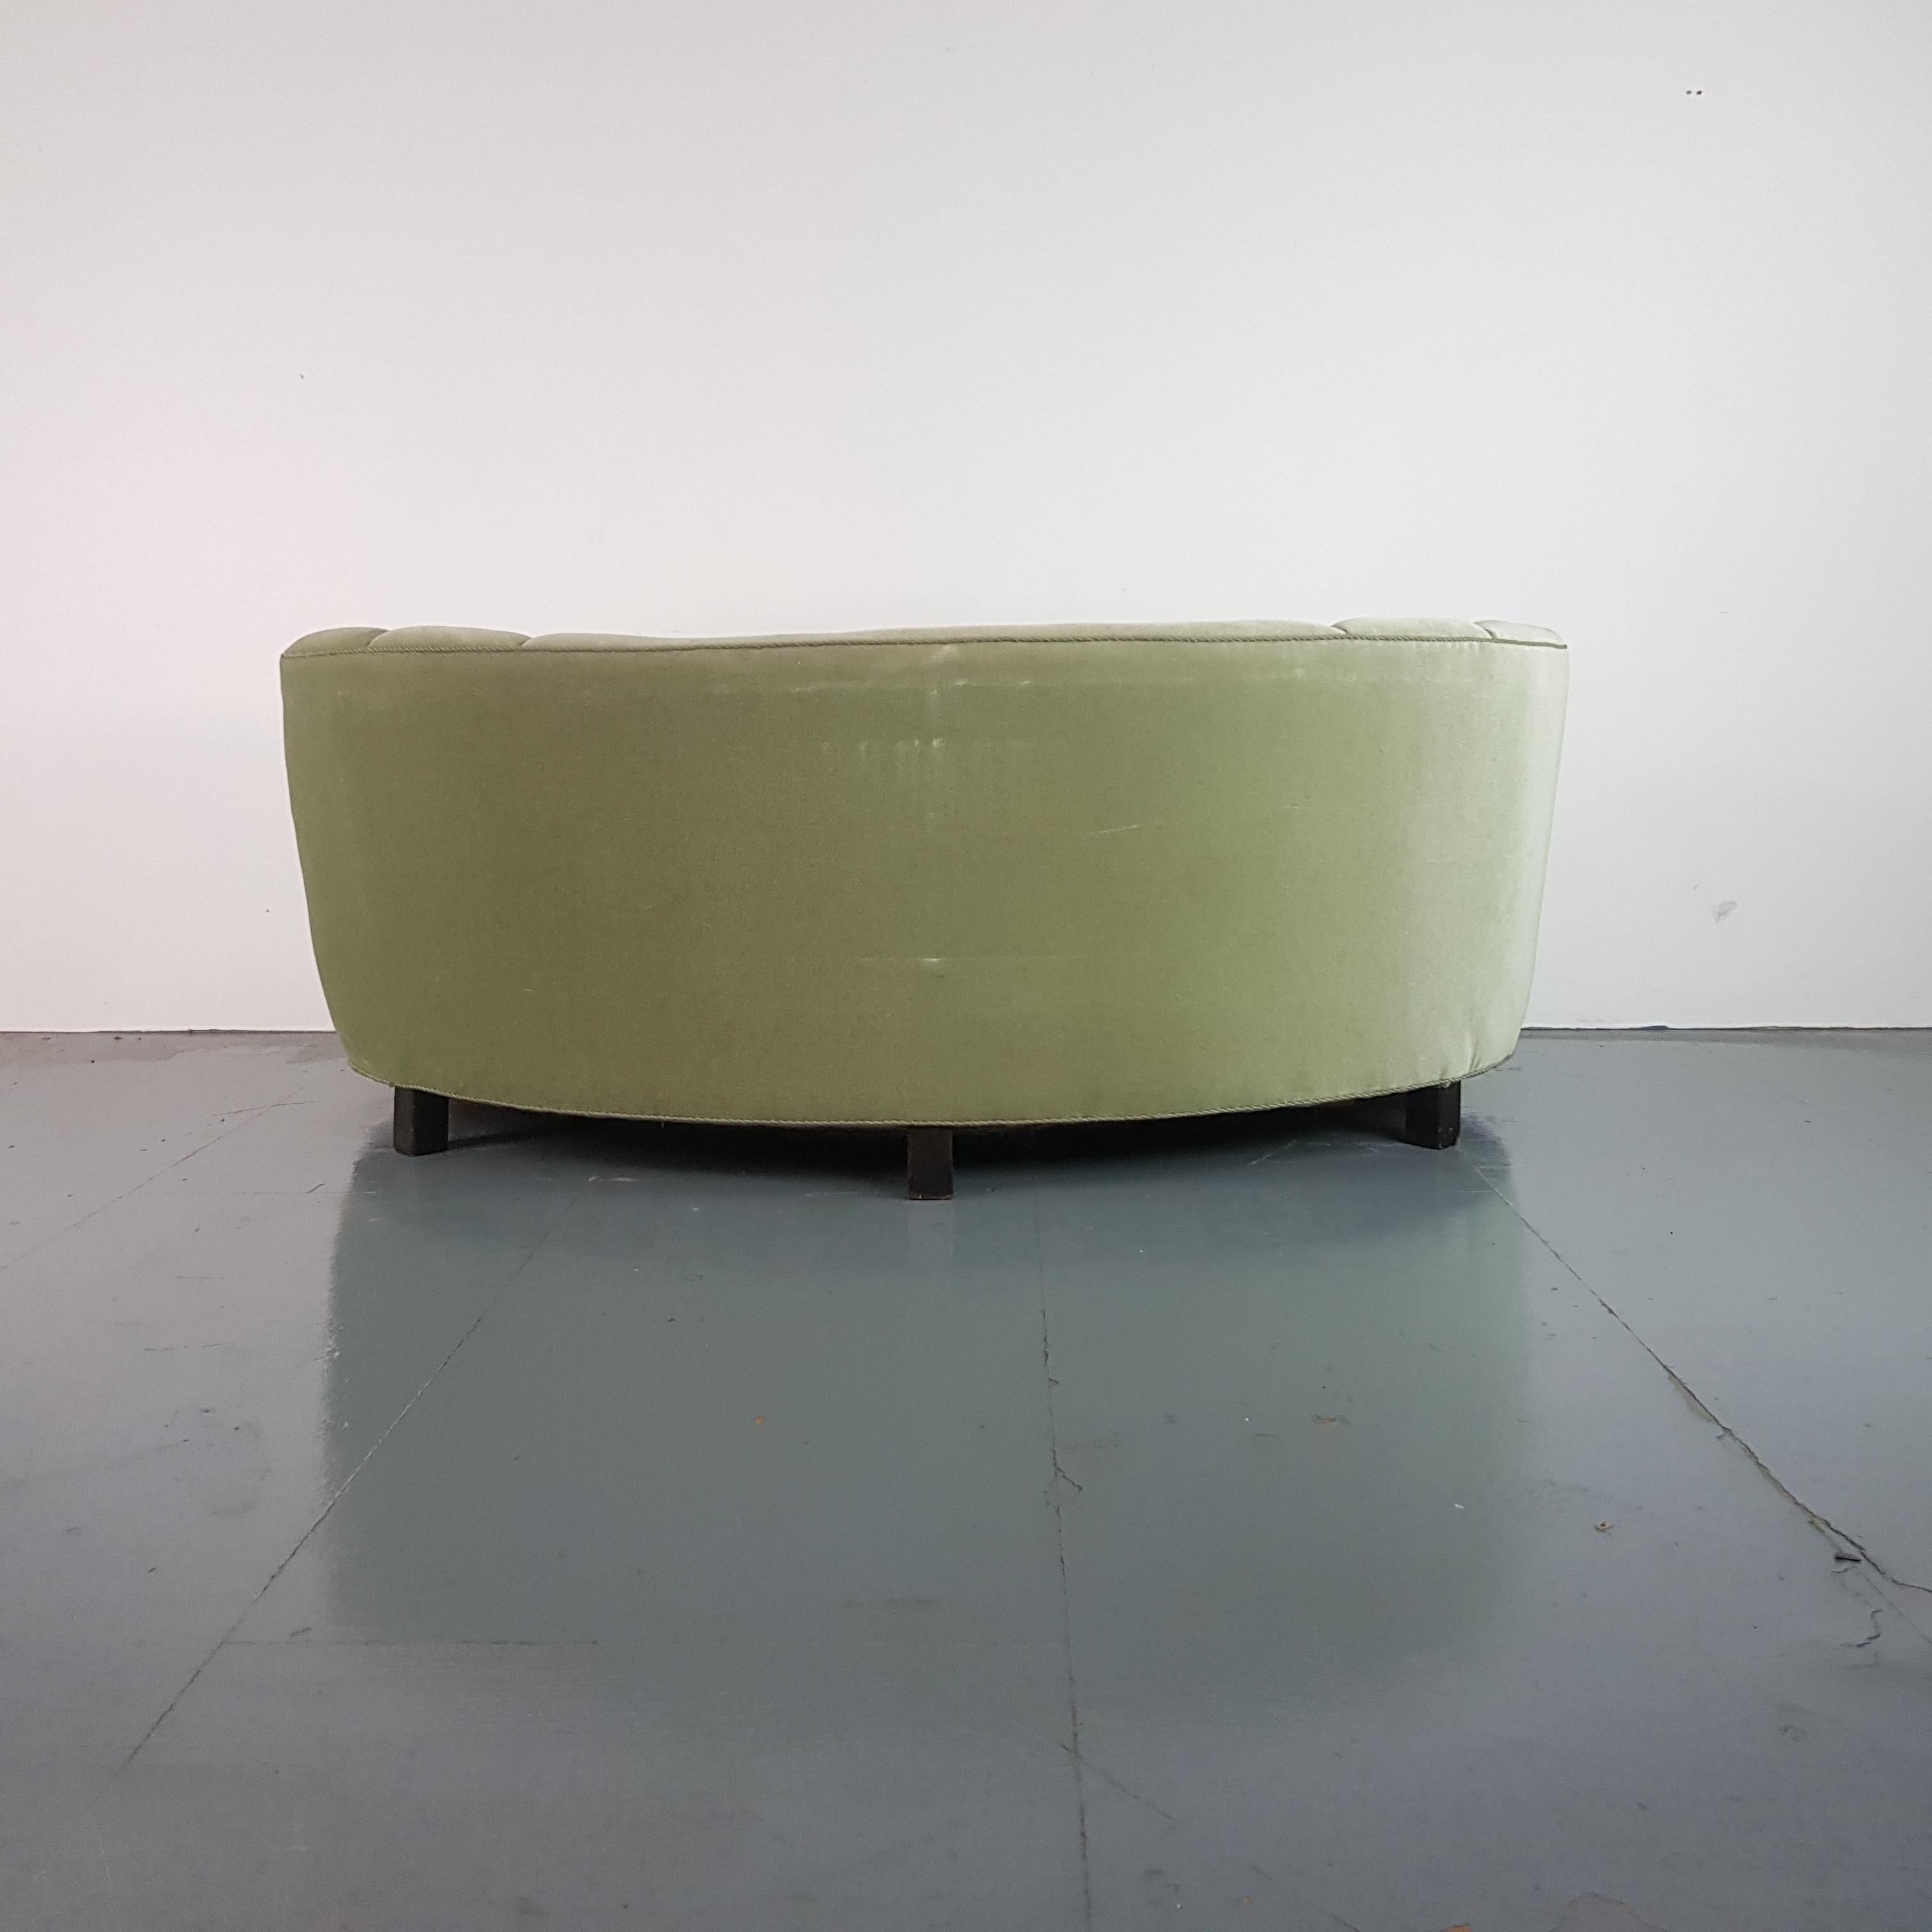 Vintage 1930s-1940s Danish Banana Sofa with Original Green Velvet Upholstery In Good Condition For Sale In Lewes, East Sussex